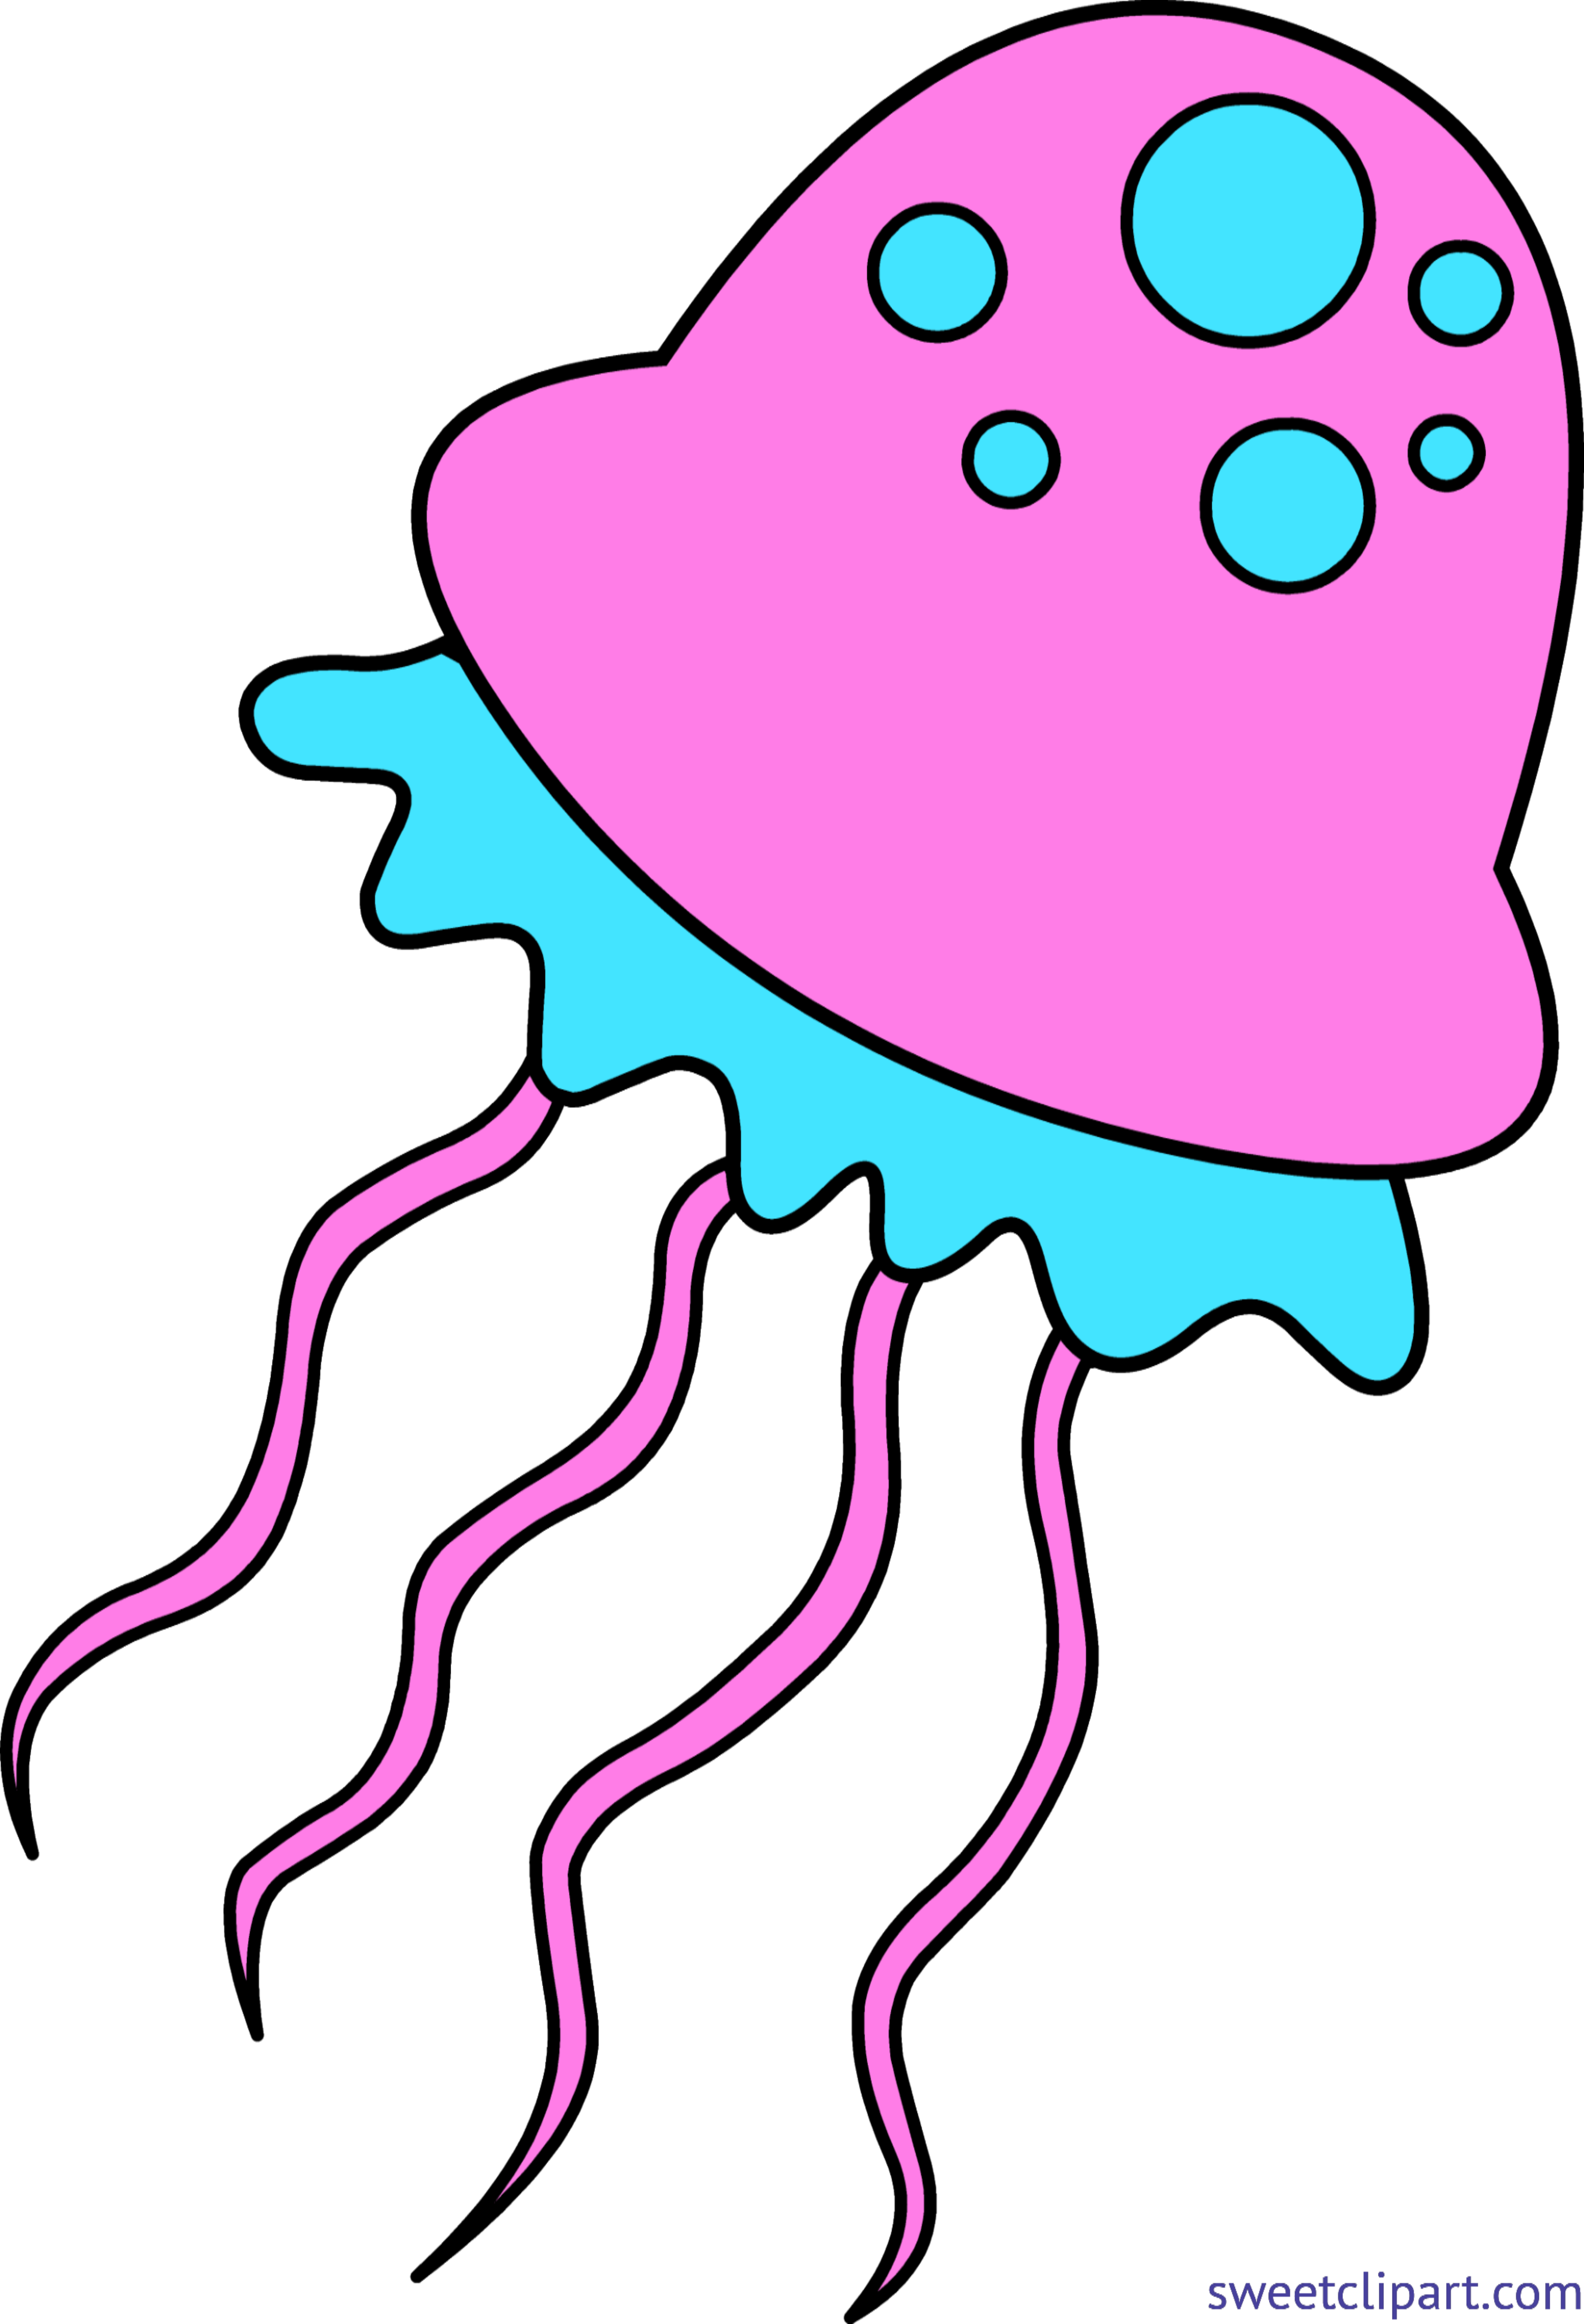 Jelly clipart coloured. Jellyfish pink blue clip